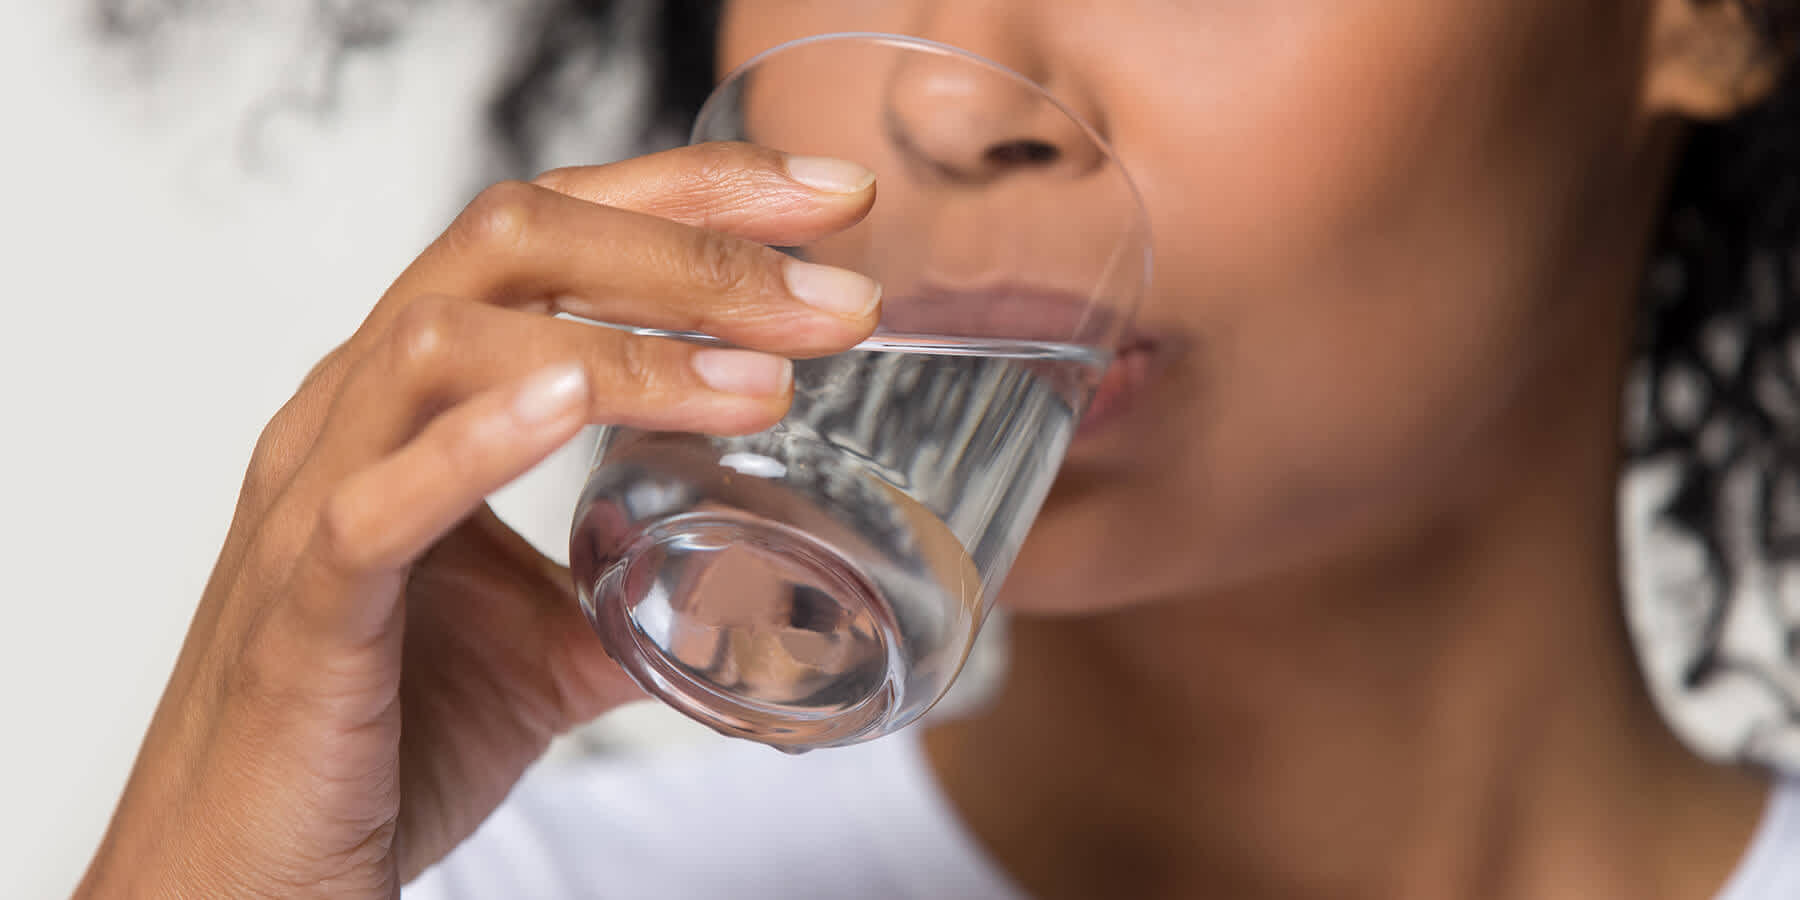 Woman drinking a glass of water after a meal to help digestion